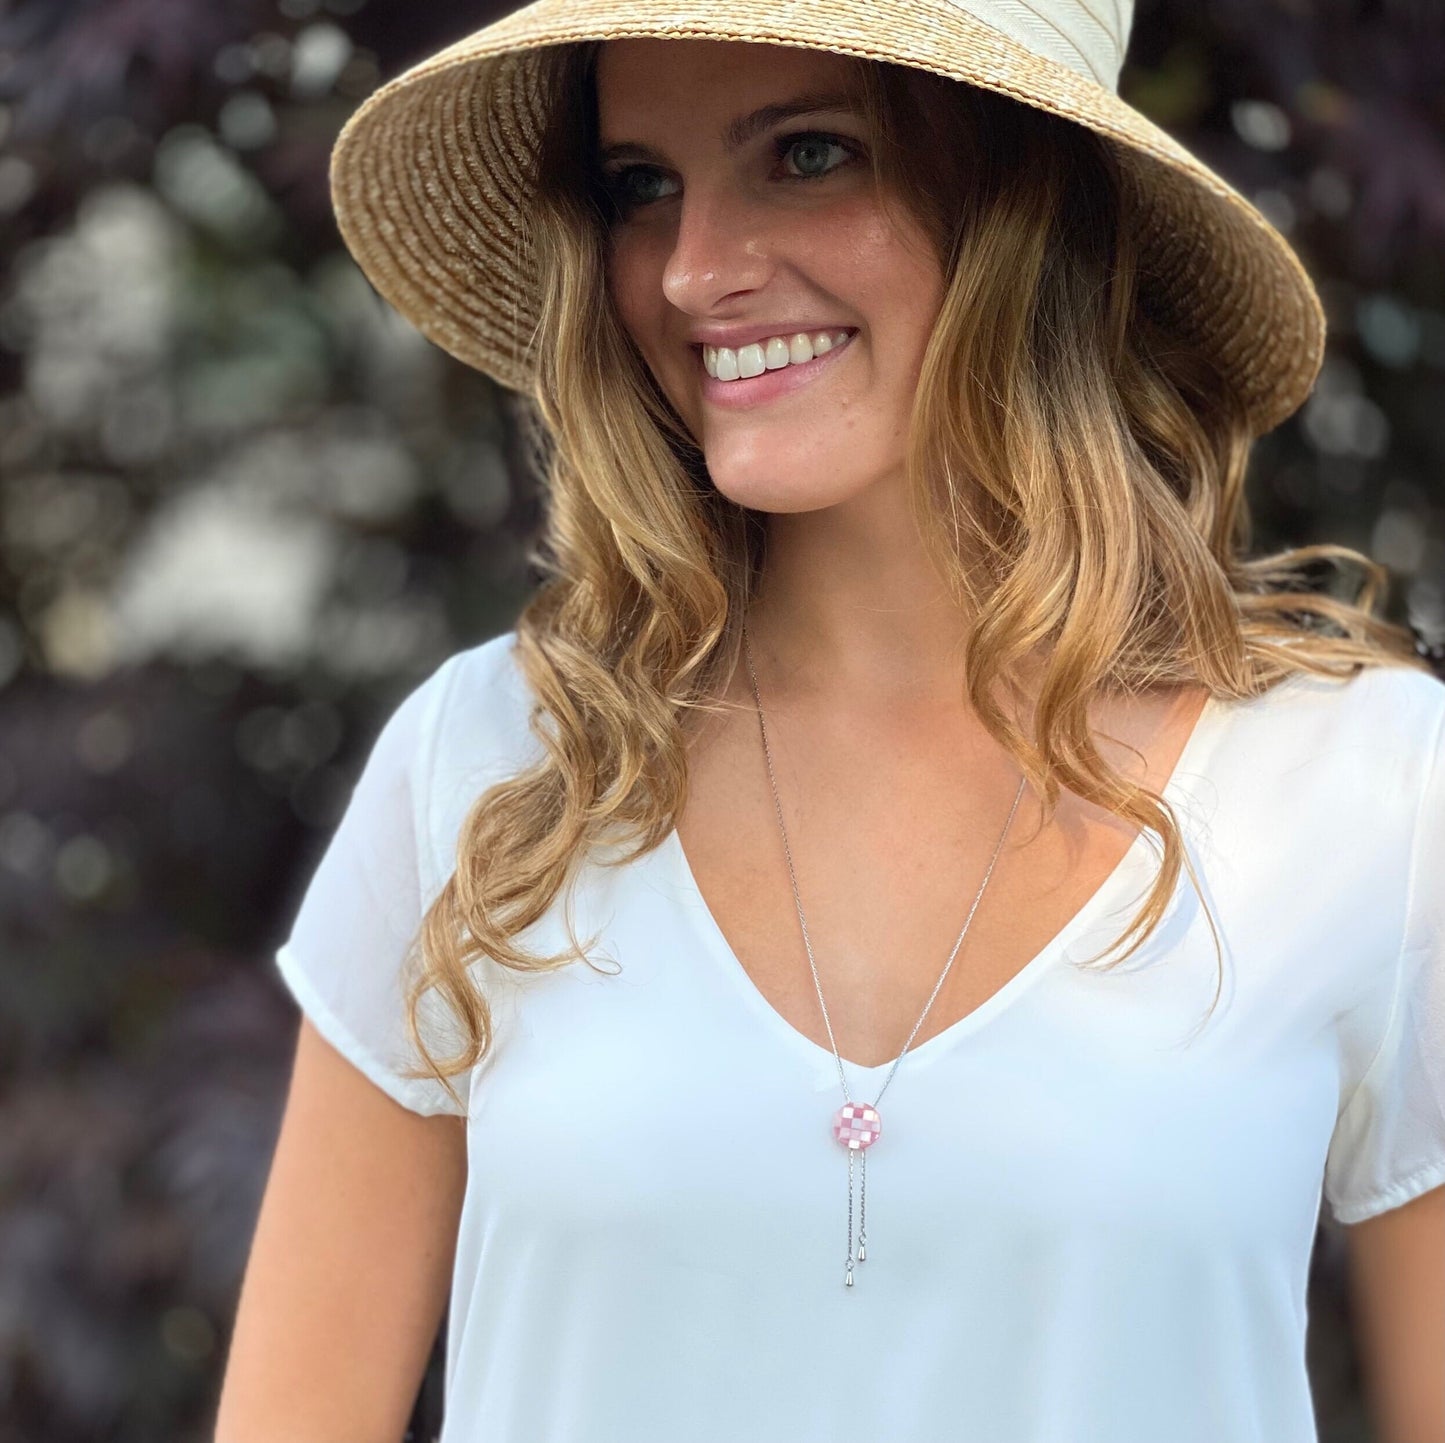 Unique Graduation Gift for Girl/Her, Minimalist Mother of Pearl Shell Necklace, Adjustable Bolo Tie